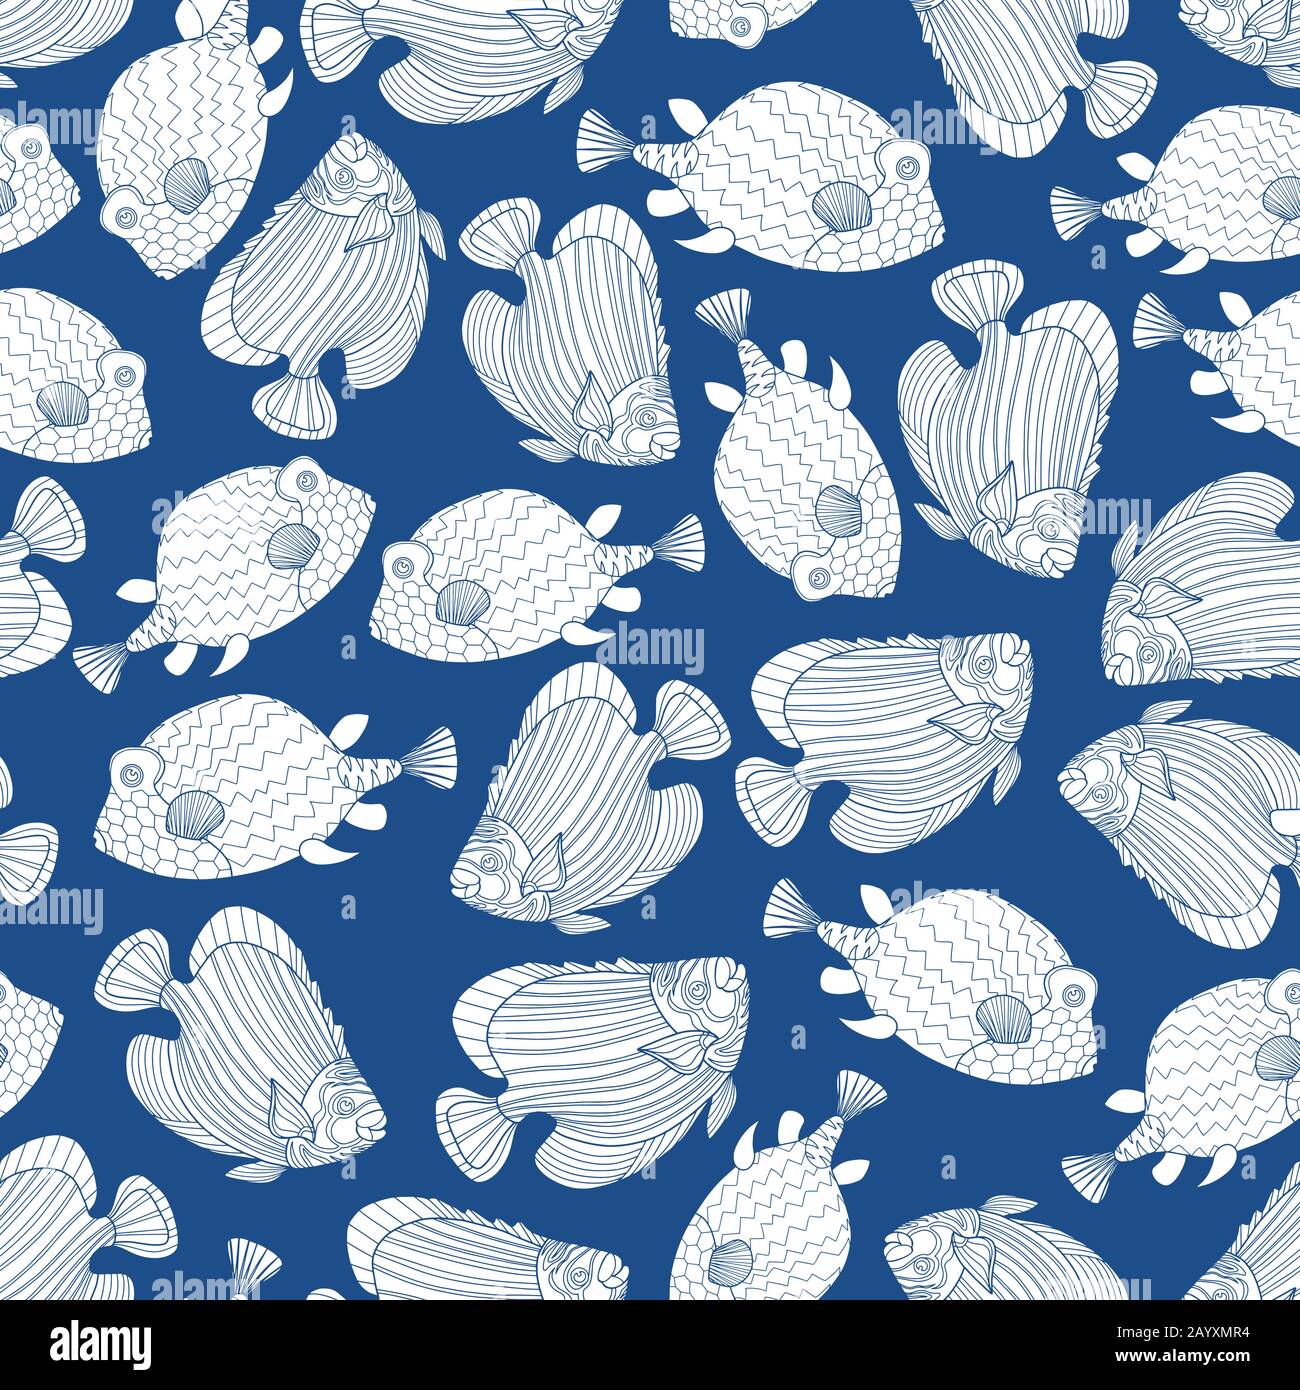 Seamless pattern with white fish in doodle style isolated on trendy blue background. Vector coral reef fish outline illustration. Stock Vector